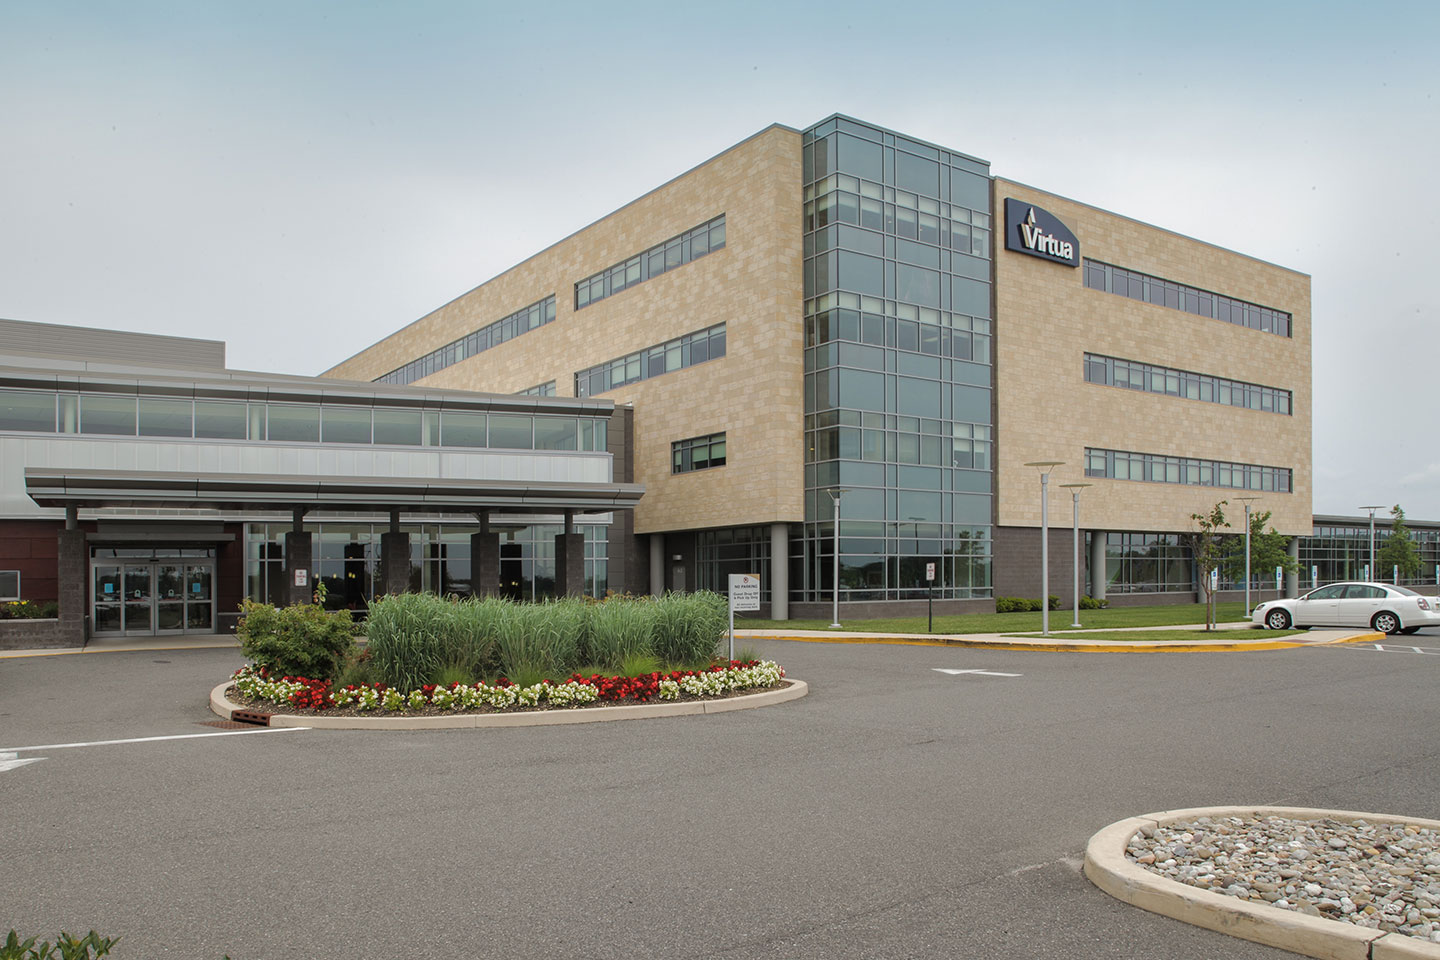 We provided land development services including site plan design, regulatory agency permitting, and preparation of an Environmental Impact Statement for a Virtua Health facility in Washington Township, New Jersey.